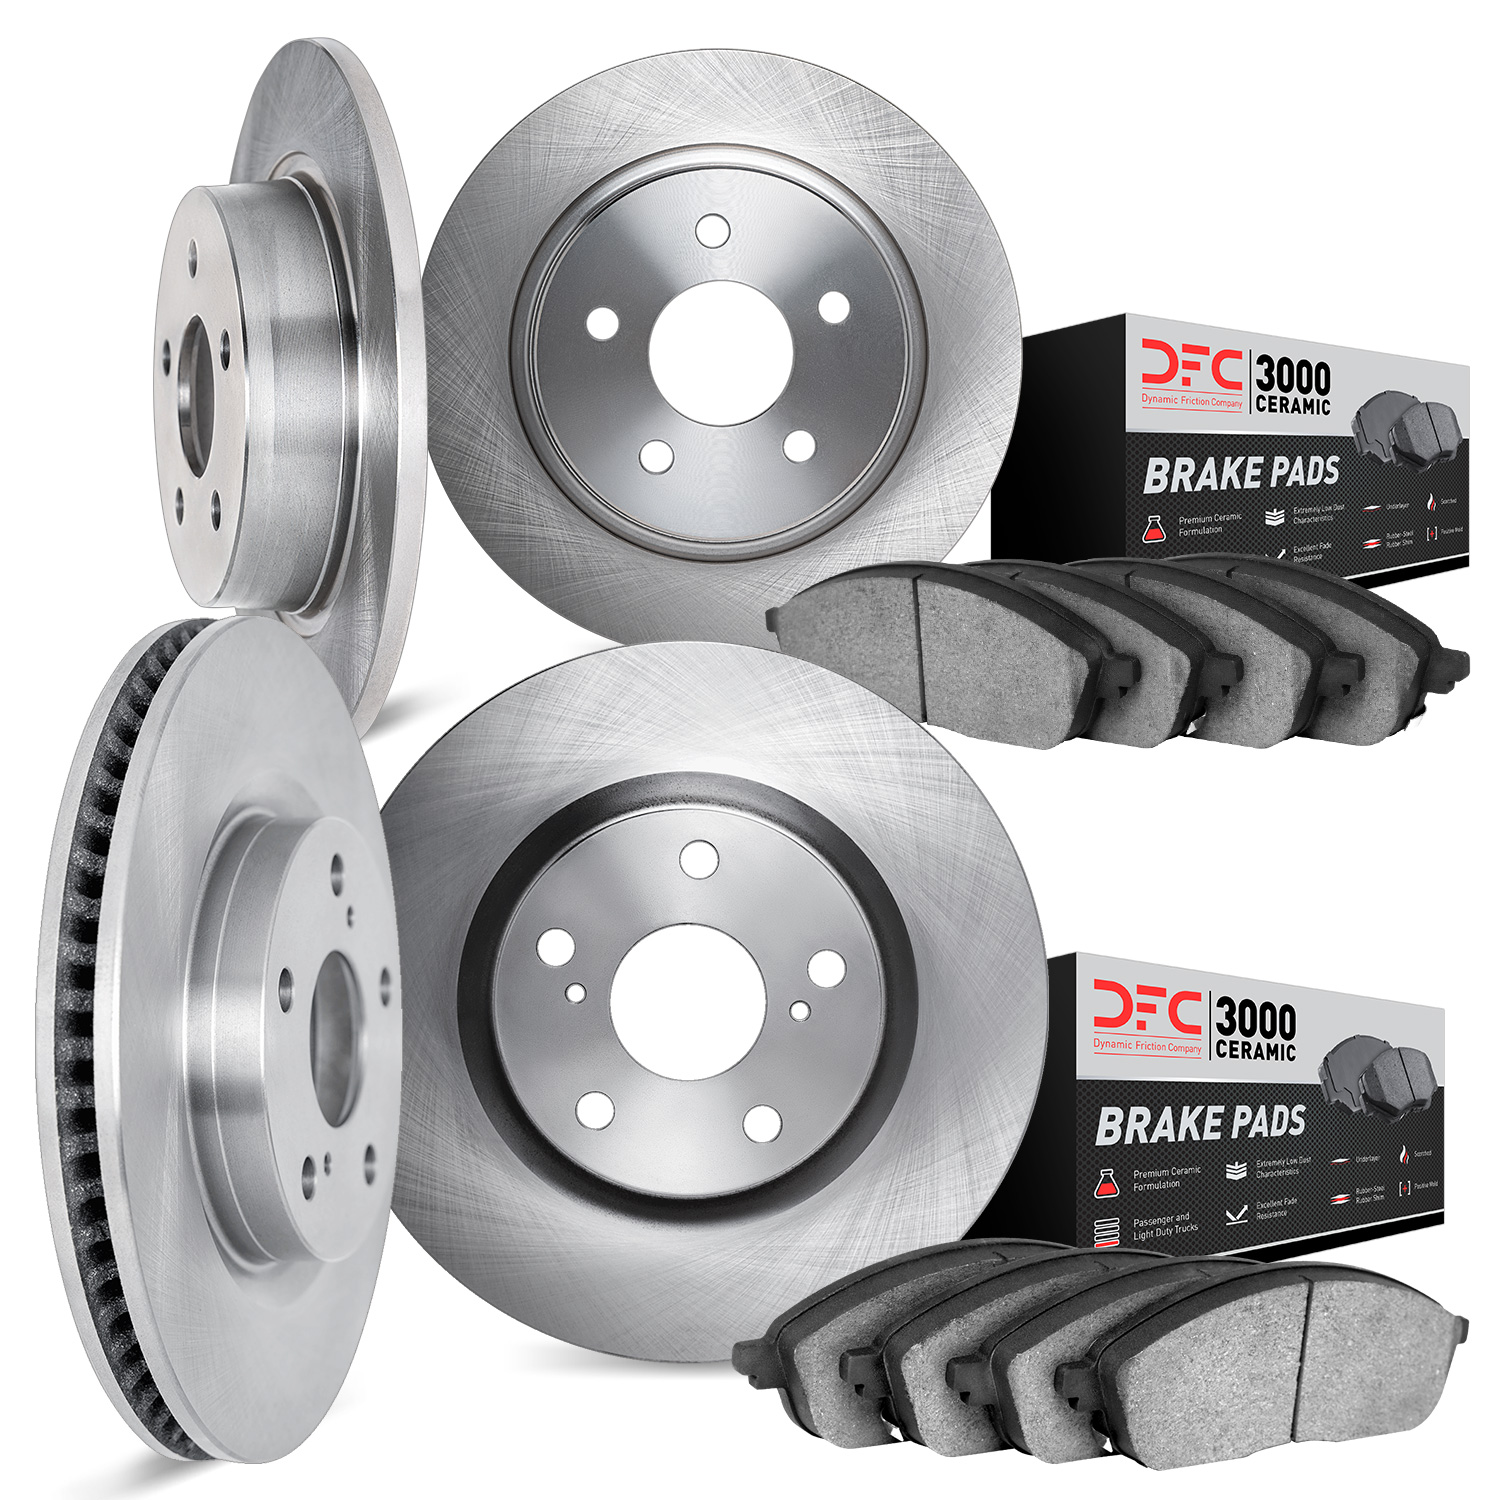 6304-39017 Brake Rotors with 3000-Series Ceramic Brake Pads Kit, Fits Select Mopar, Position: Front and Rear